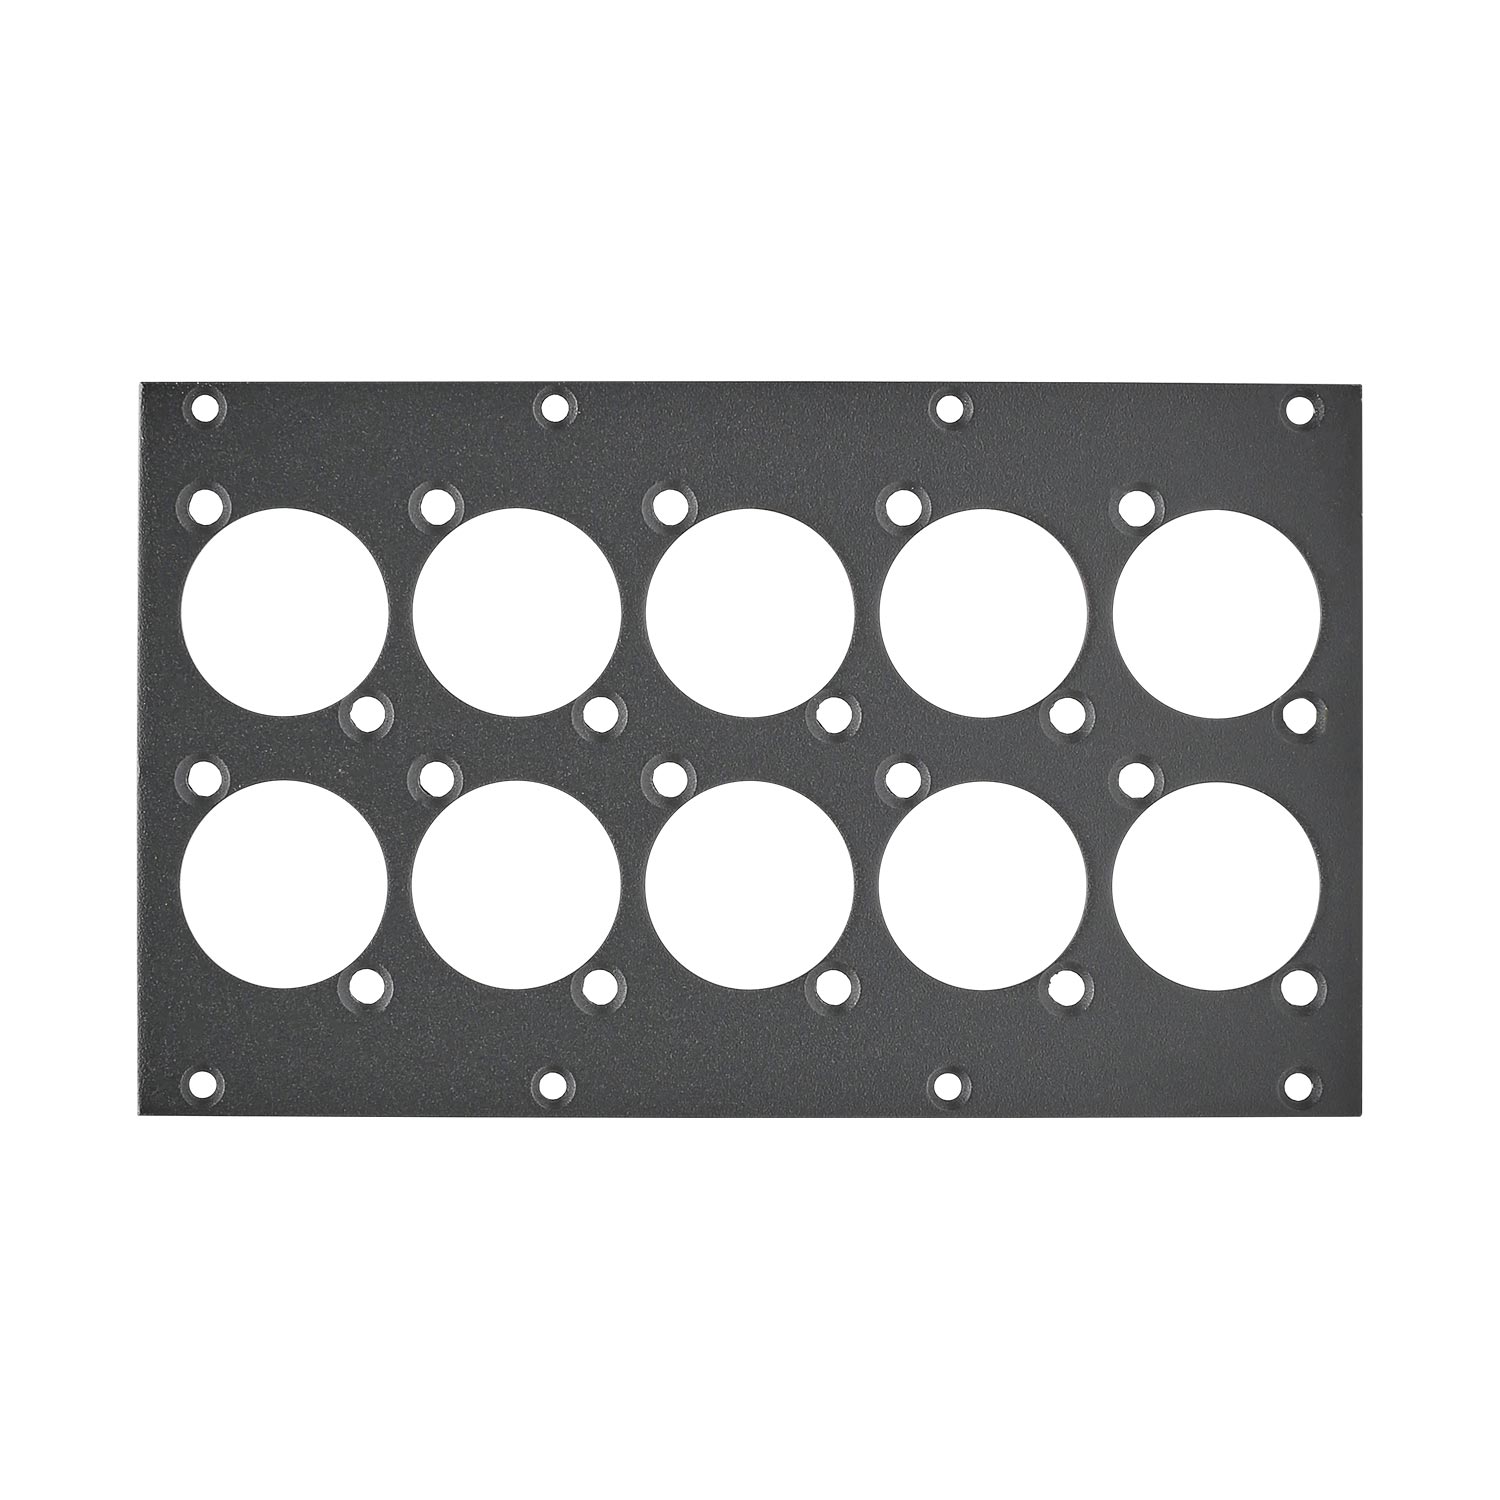 front panel 10 x D-flange, 2 HE, 4 BE for SYS-series, Galvanized sheet steel, colour: grey